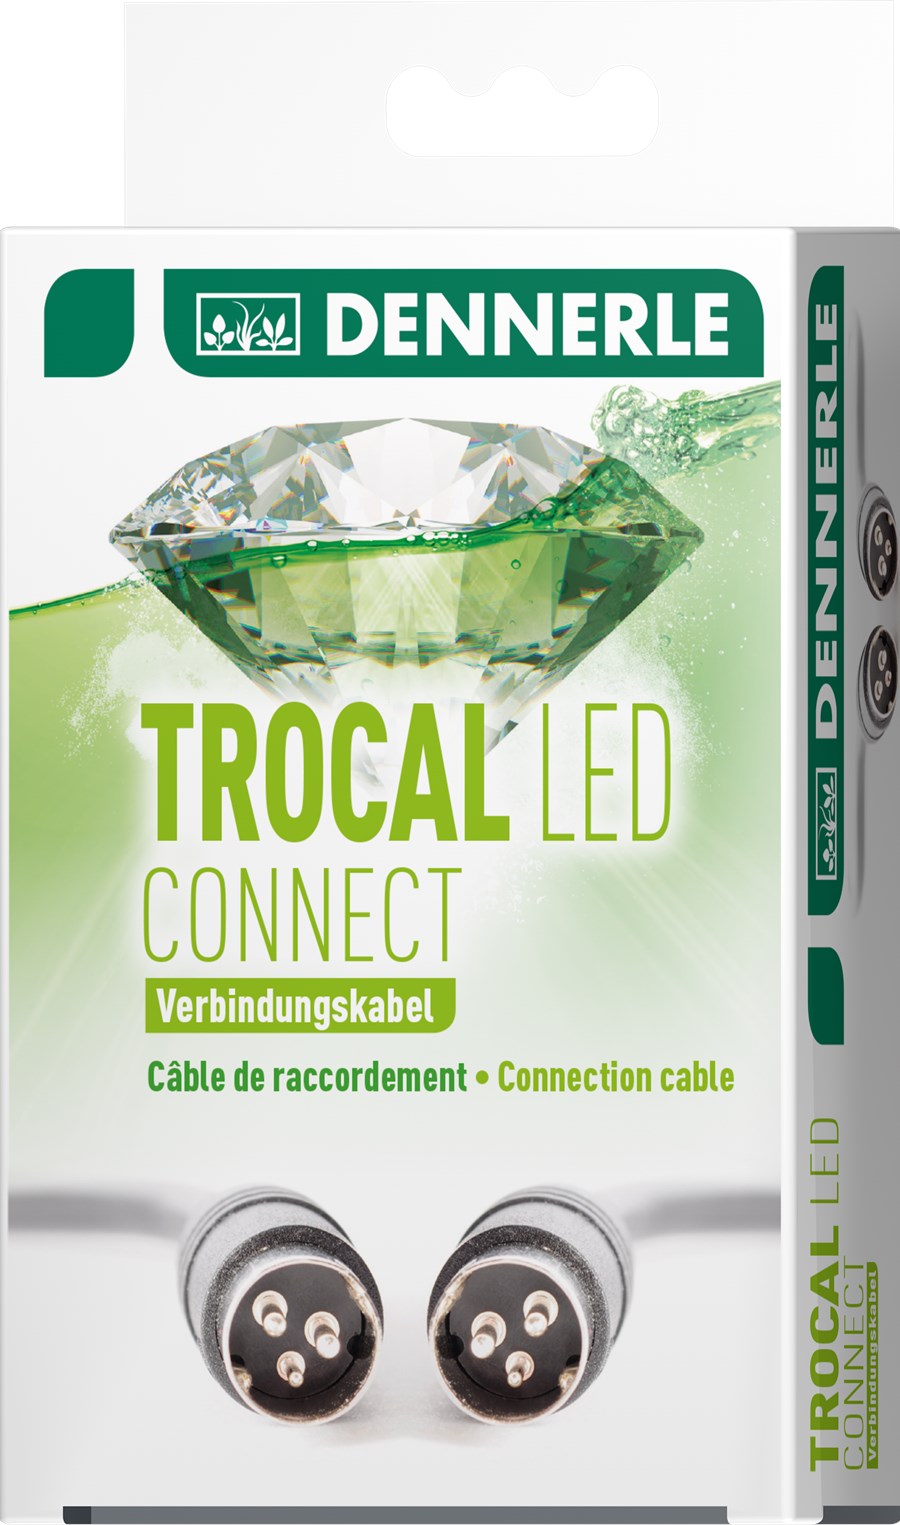 TROCAL LED connect